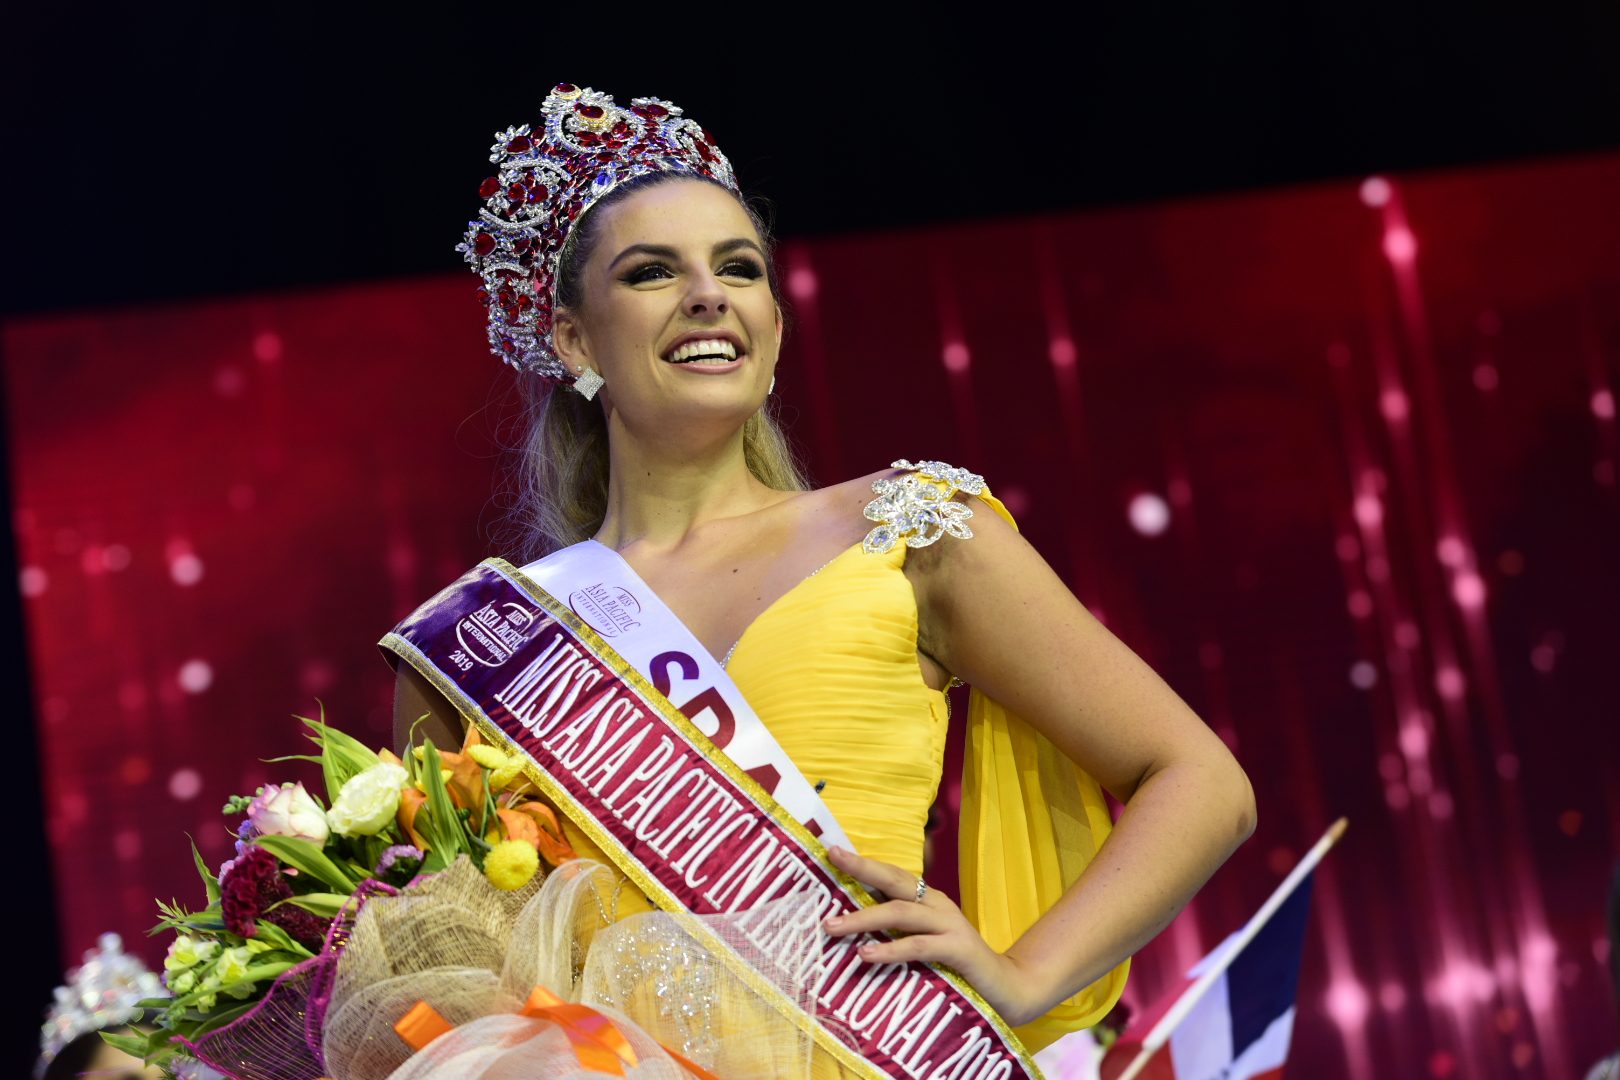 Spain’s Chaiyenne Huisman is Miss Asia Pacific International 2019